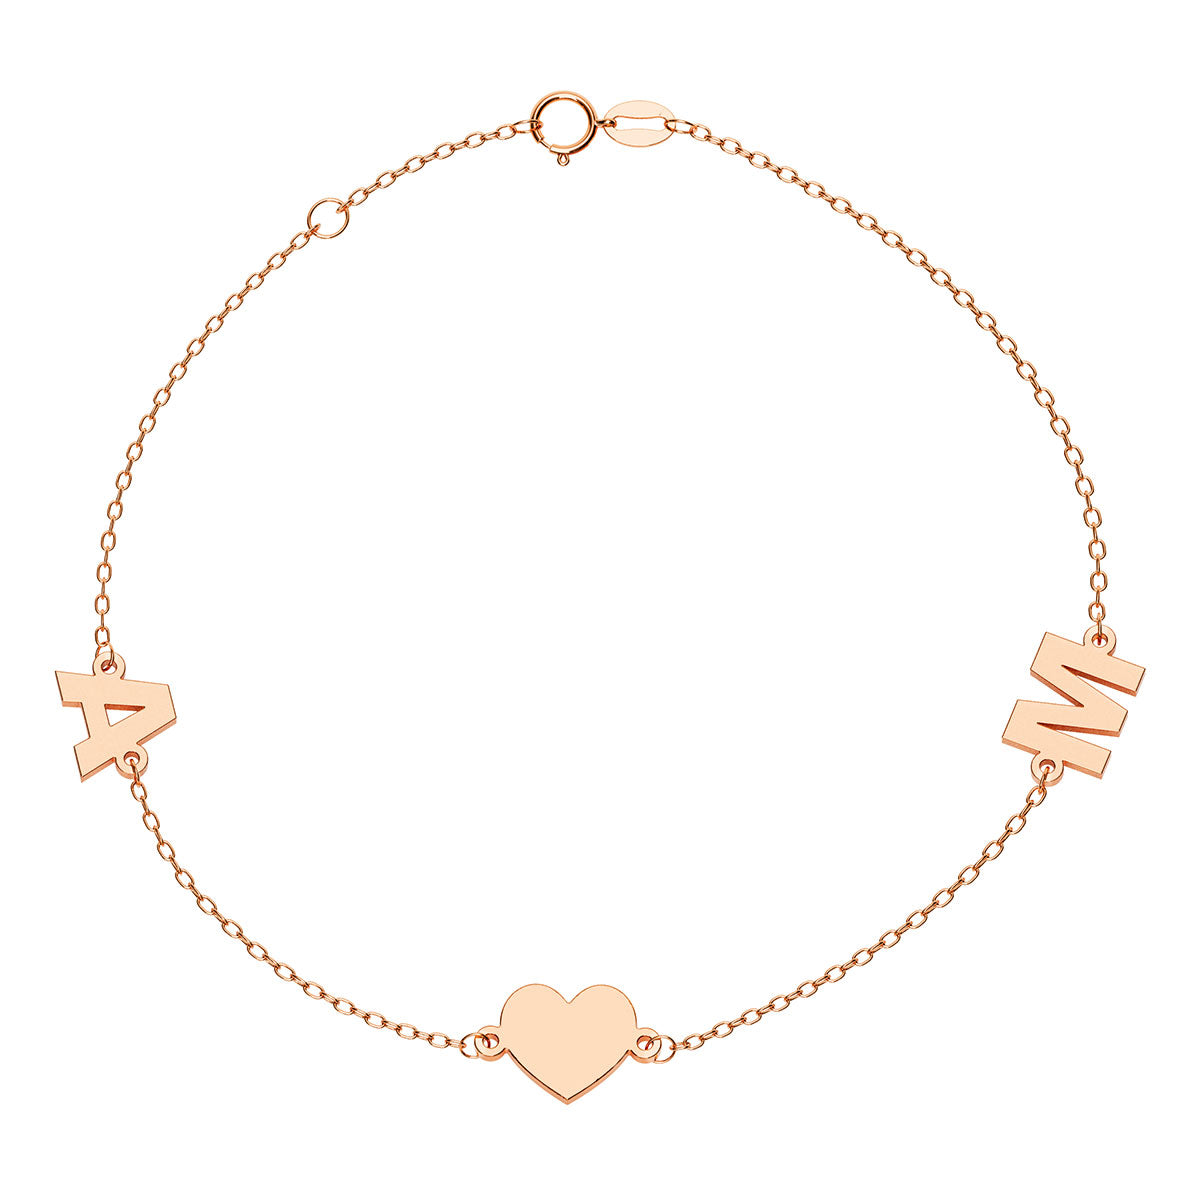 Personalized 2 Initial Bracelet With Heart Charm